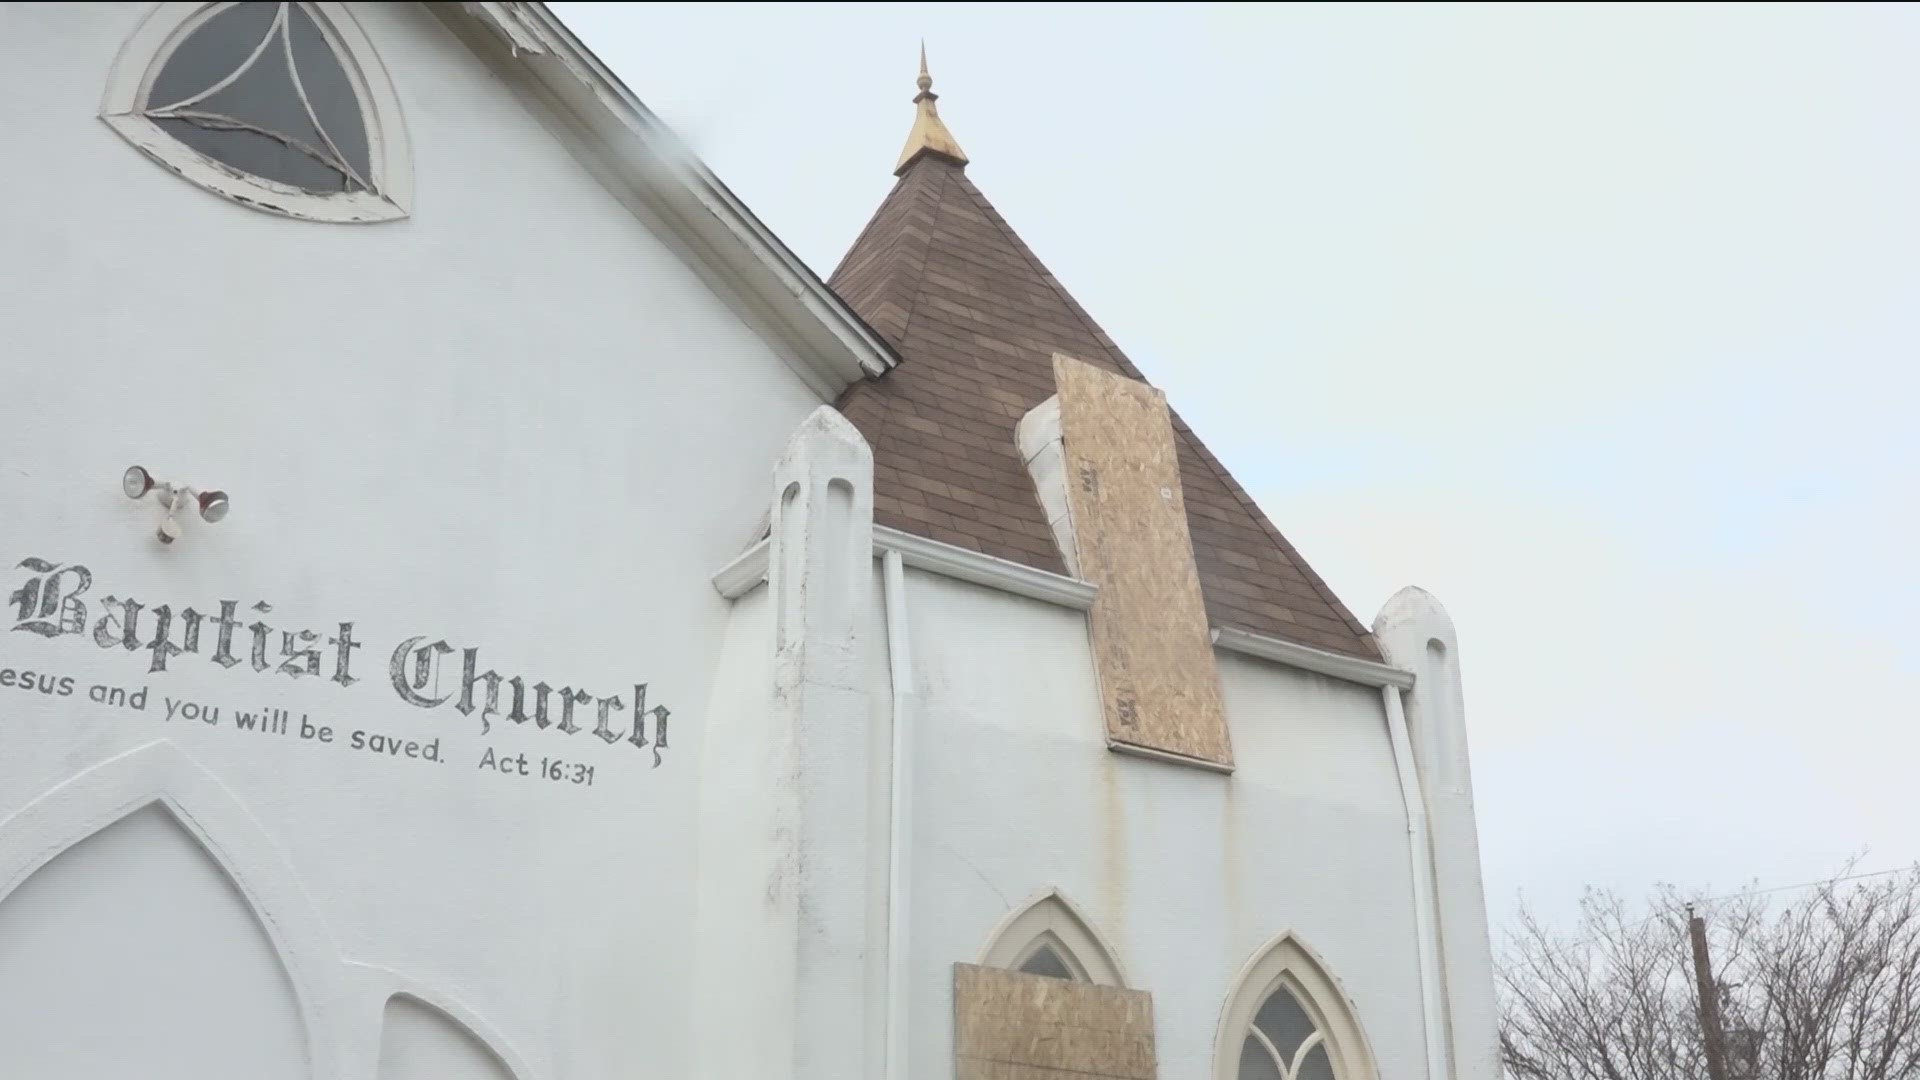 Goodwill Baptist Church in South Austin is now left with thousands of dollars in damage after a fire late Monday night.